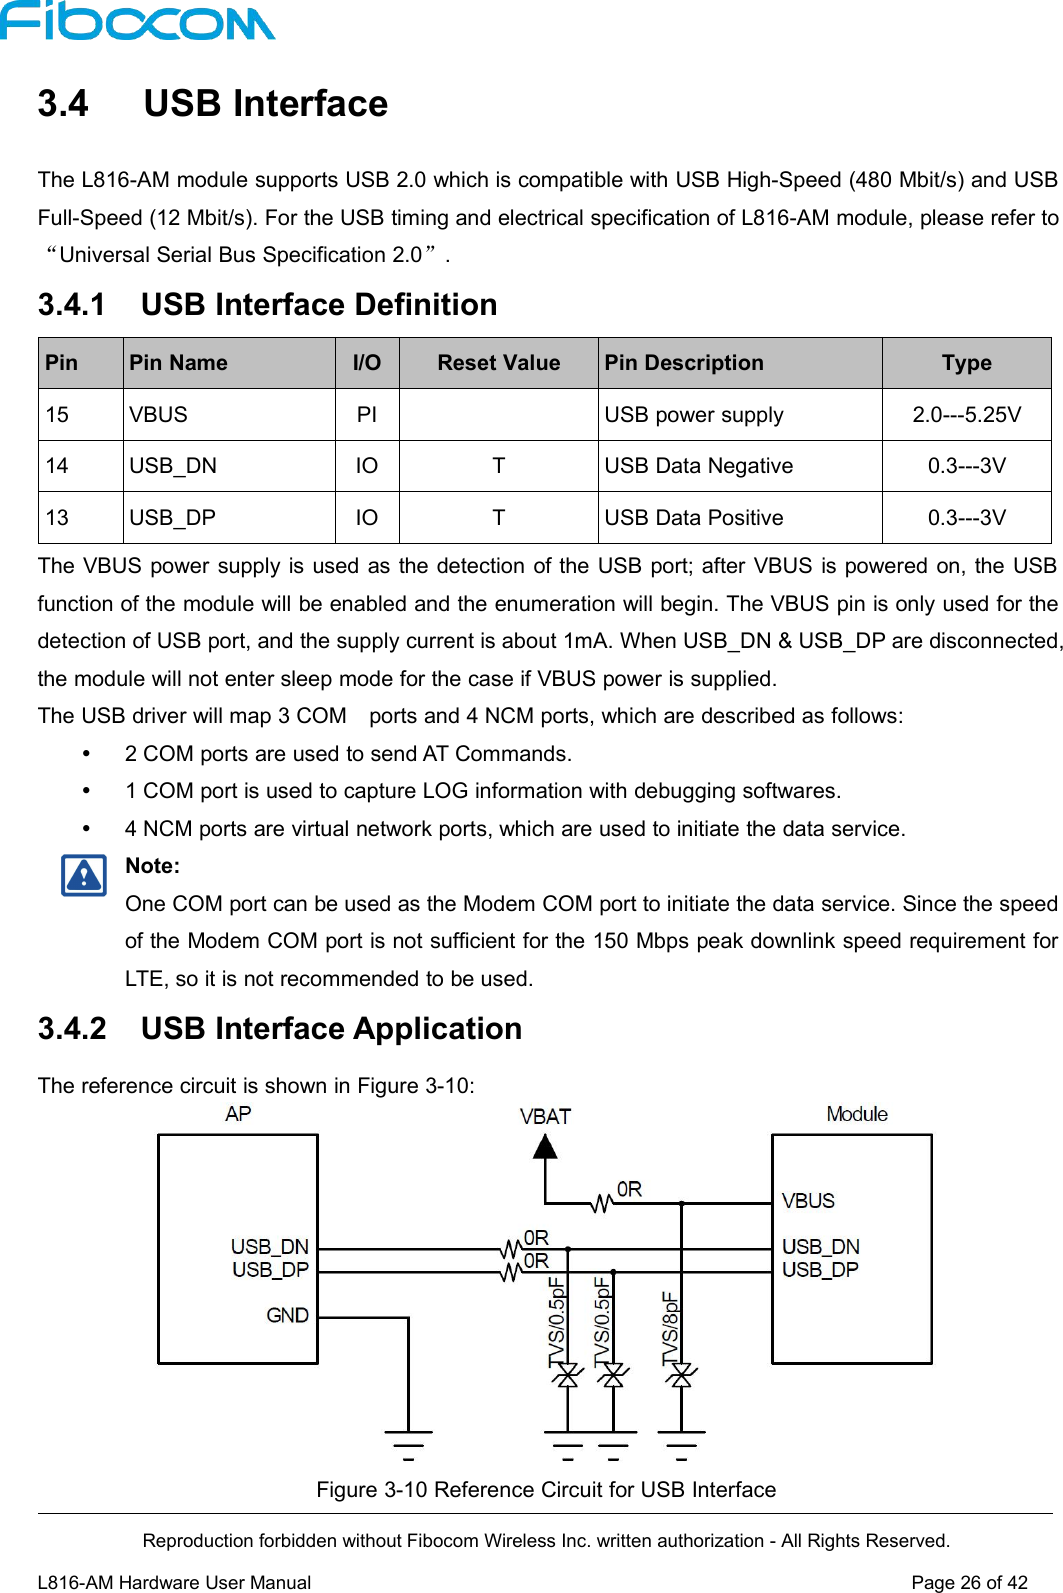 Reproduction forbidden without Fibocom Wireless Inc. written authorization - All Rights Reserved.L816-AM Hardware User Manual Page26of423.4 USB InterfaceThe L816-AM module supports USB 2.0 which is compatible with USB High-Speed (480 Mbit/s) and USBFull-Speed (12 Mbit/s). For the USB timing and electrical specification of L816-AM module, please refer to“Universal Serial Bus Specification 2.0”.3.4.1 USB Interface DefinitionPinPin NameI/OReset ValuePin DescriptionType15VBUSPIUSB power supply2.0---5.25V14USB_DNIOTUSB Data Negative0.3---3V13USB_DPIOTUSB Data Positive0.3---3VThe VBUS power supply is used as the detection of the USB port; after VBUS is powered on, the USBfunction of the module will be enabled and the enumeration will begin. The VBUS pin is only used for thedetection of USB port, and the supply current is about 1mA. When USB_DN &amp; USB_DP are disconnected,the module will not enter sleep mode for the case if VBUS power is supplied.The USB driver will map 3 COM ports and 4 NCM ports, which are described as follows:2 COM ports are used to send AT Commands.1 COM port is used to capture LOG information with debugging softwares.4 NCM ports are virtual network ports, which are used to initiate the data service.Note:One COM port can be used as the Modem COM port to initiate the data service. Since the speedof the Modem COM port is not sufficient for the 150 Mbps peak downlink speed requirement forLTE, so it is not recommended to be used.3.4.2 USB Interface ApplicationThe reference circuit is shown in Figure 3-10:Figure 3-10 Reference Circuit for USB Interface